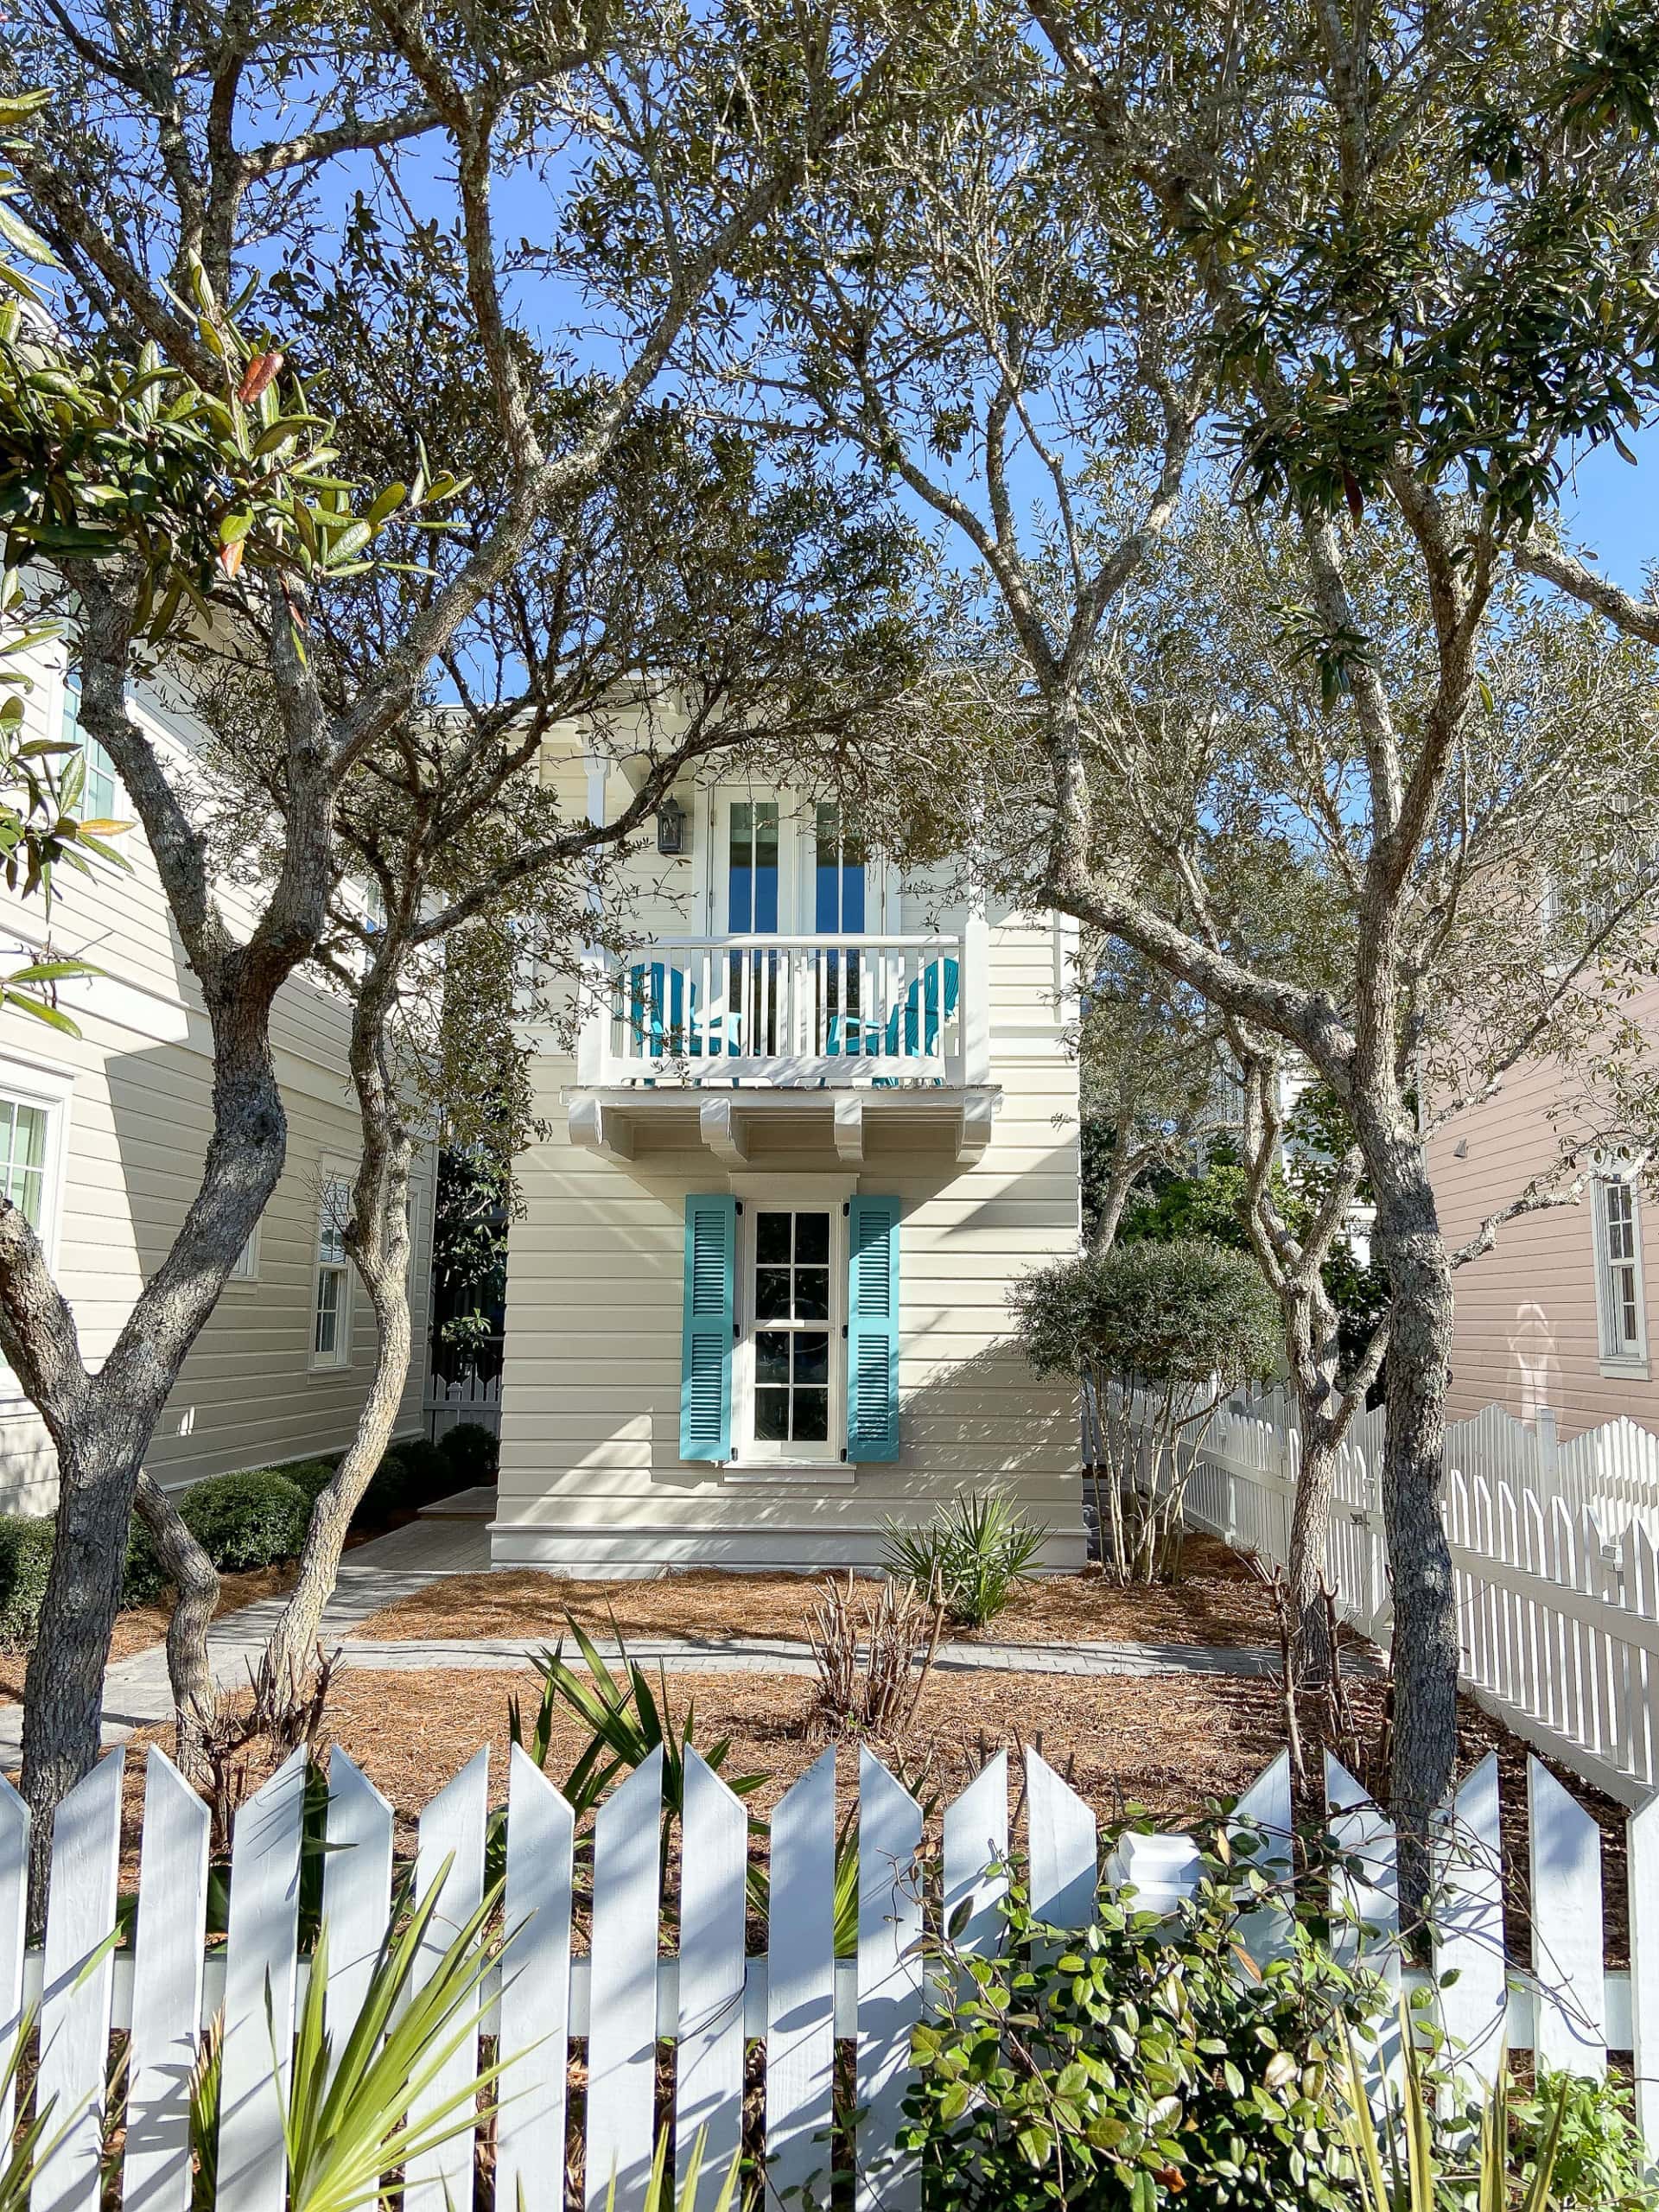 The cutest houses in Seaside Florida